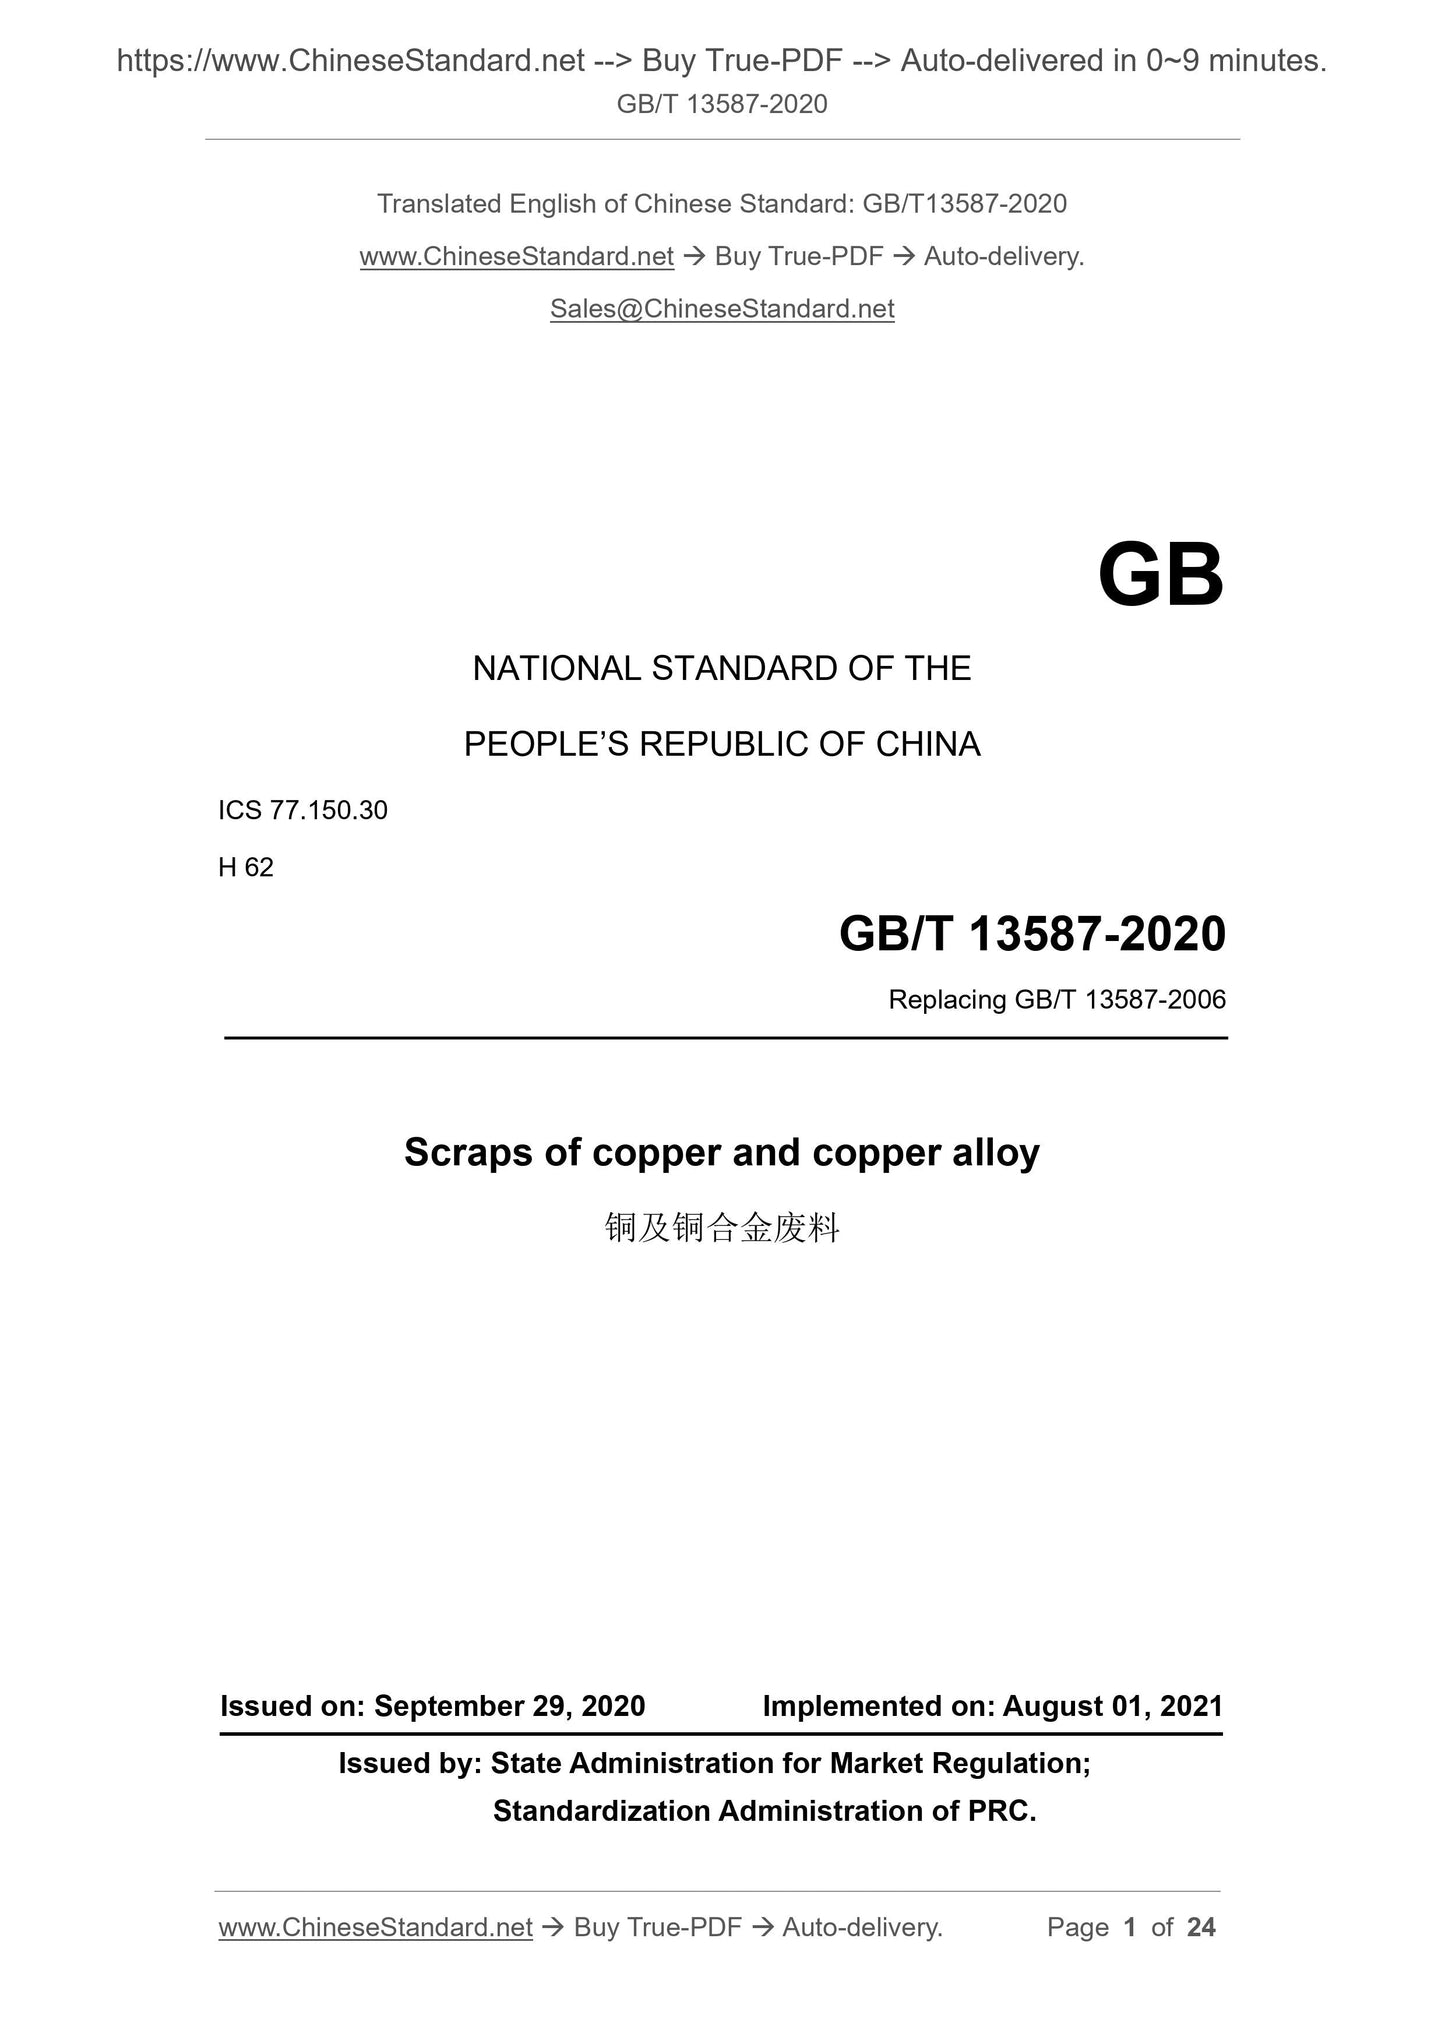 GB/T 13587-2020 Page 1